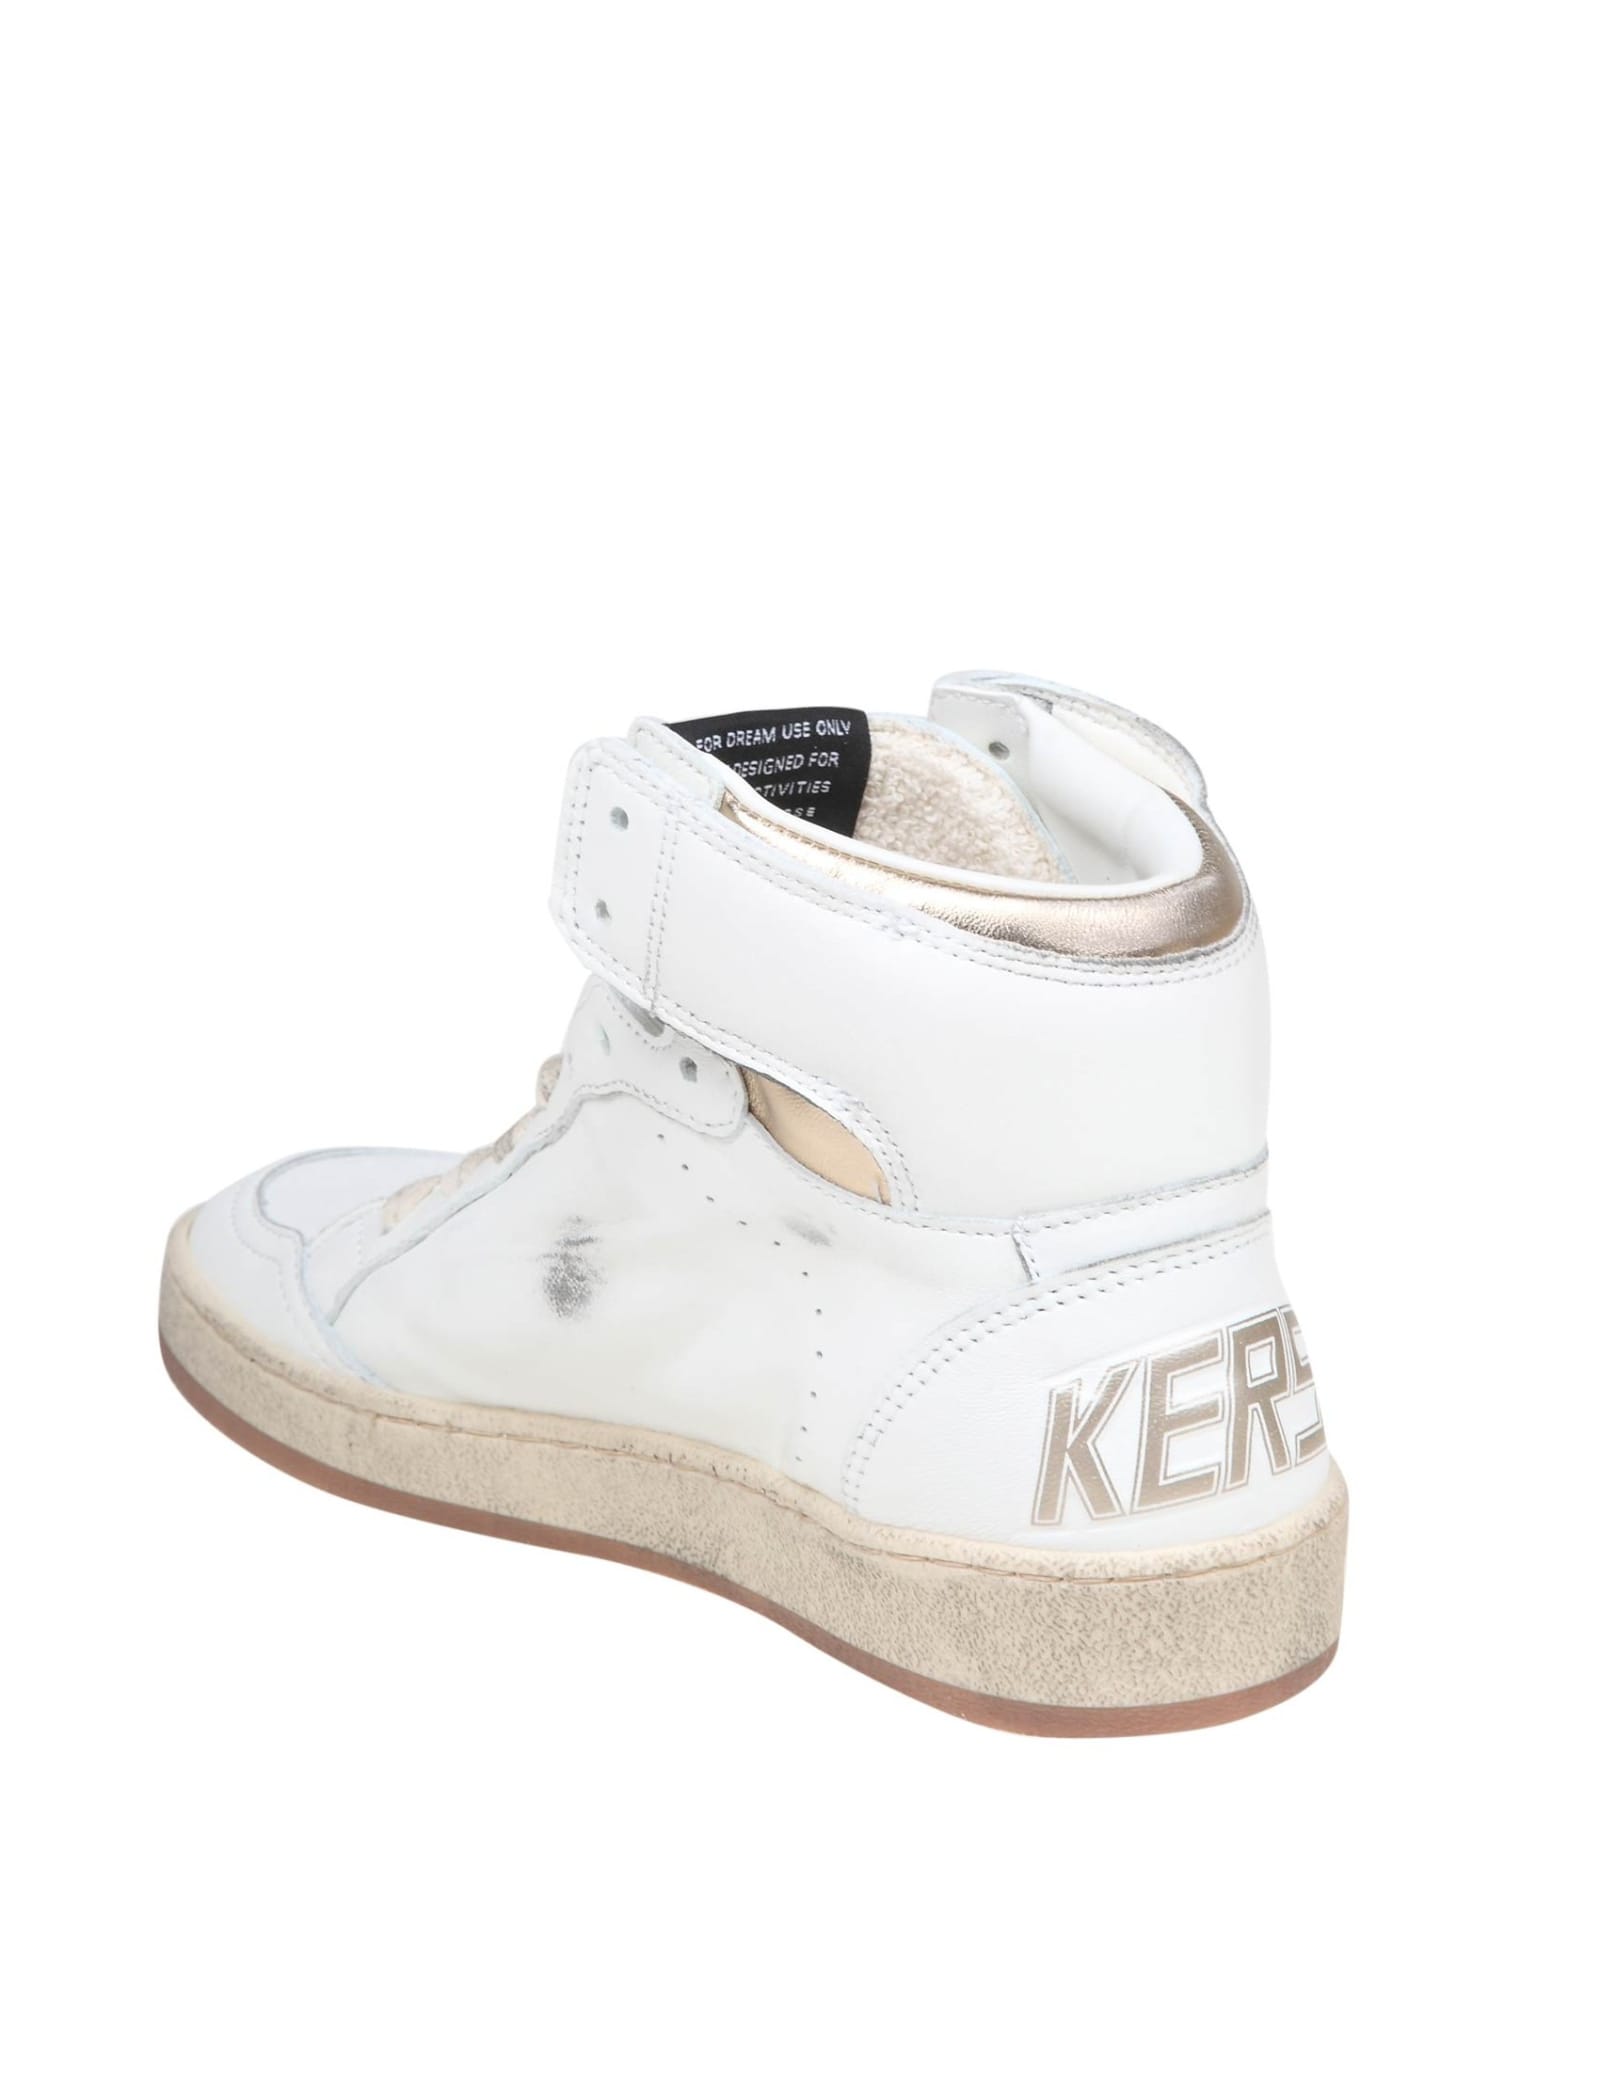 Shop Golden Goose Sky Star Sneakers In Leather With Gold Laminated Star In White/dark Gold